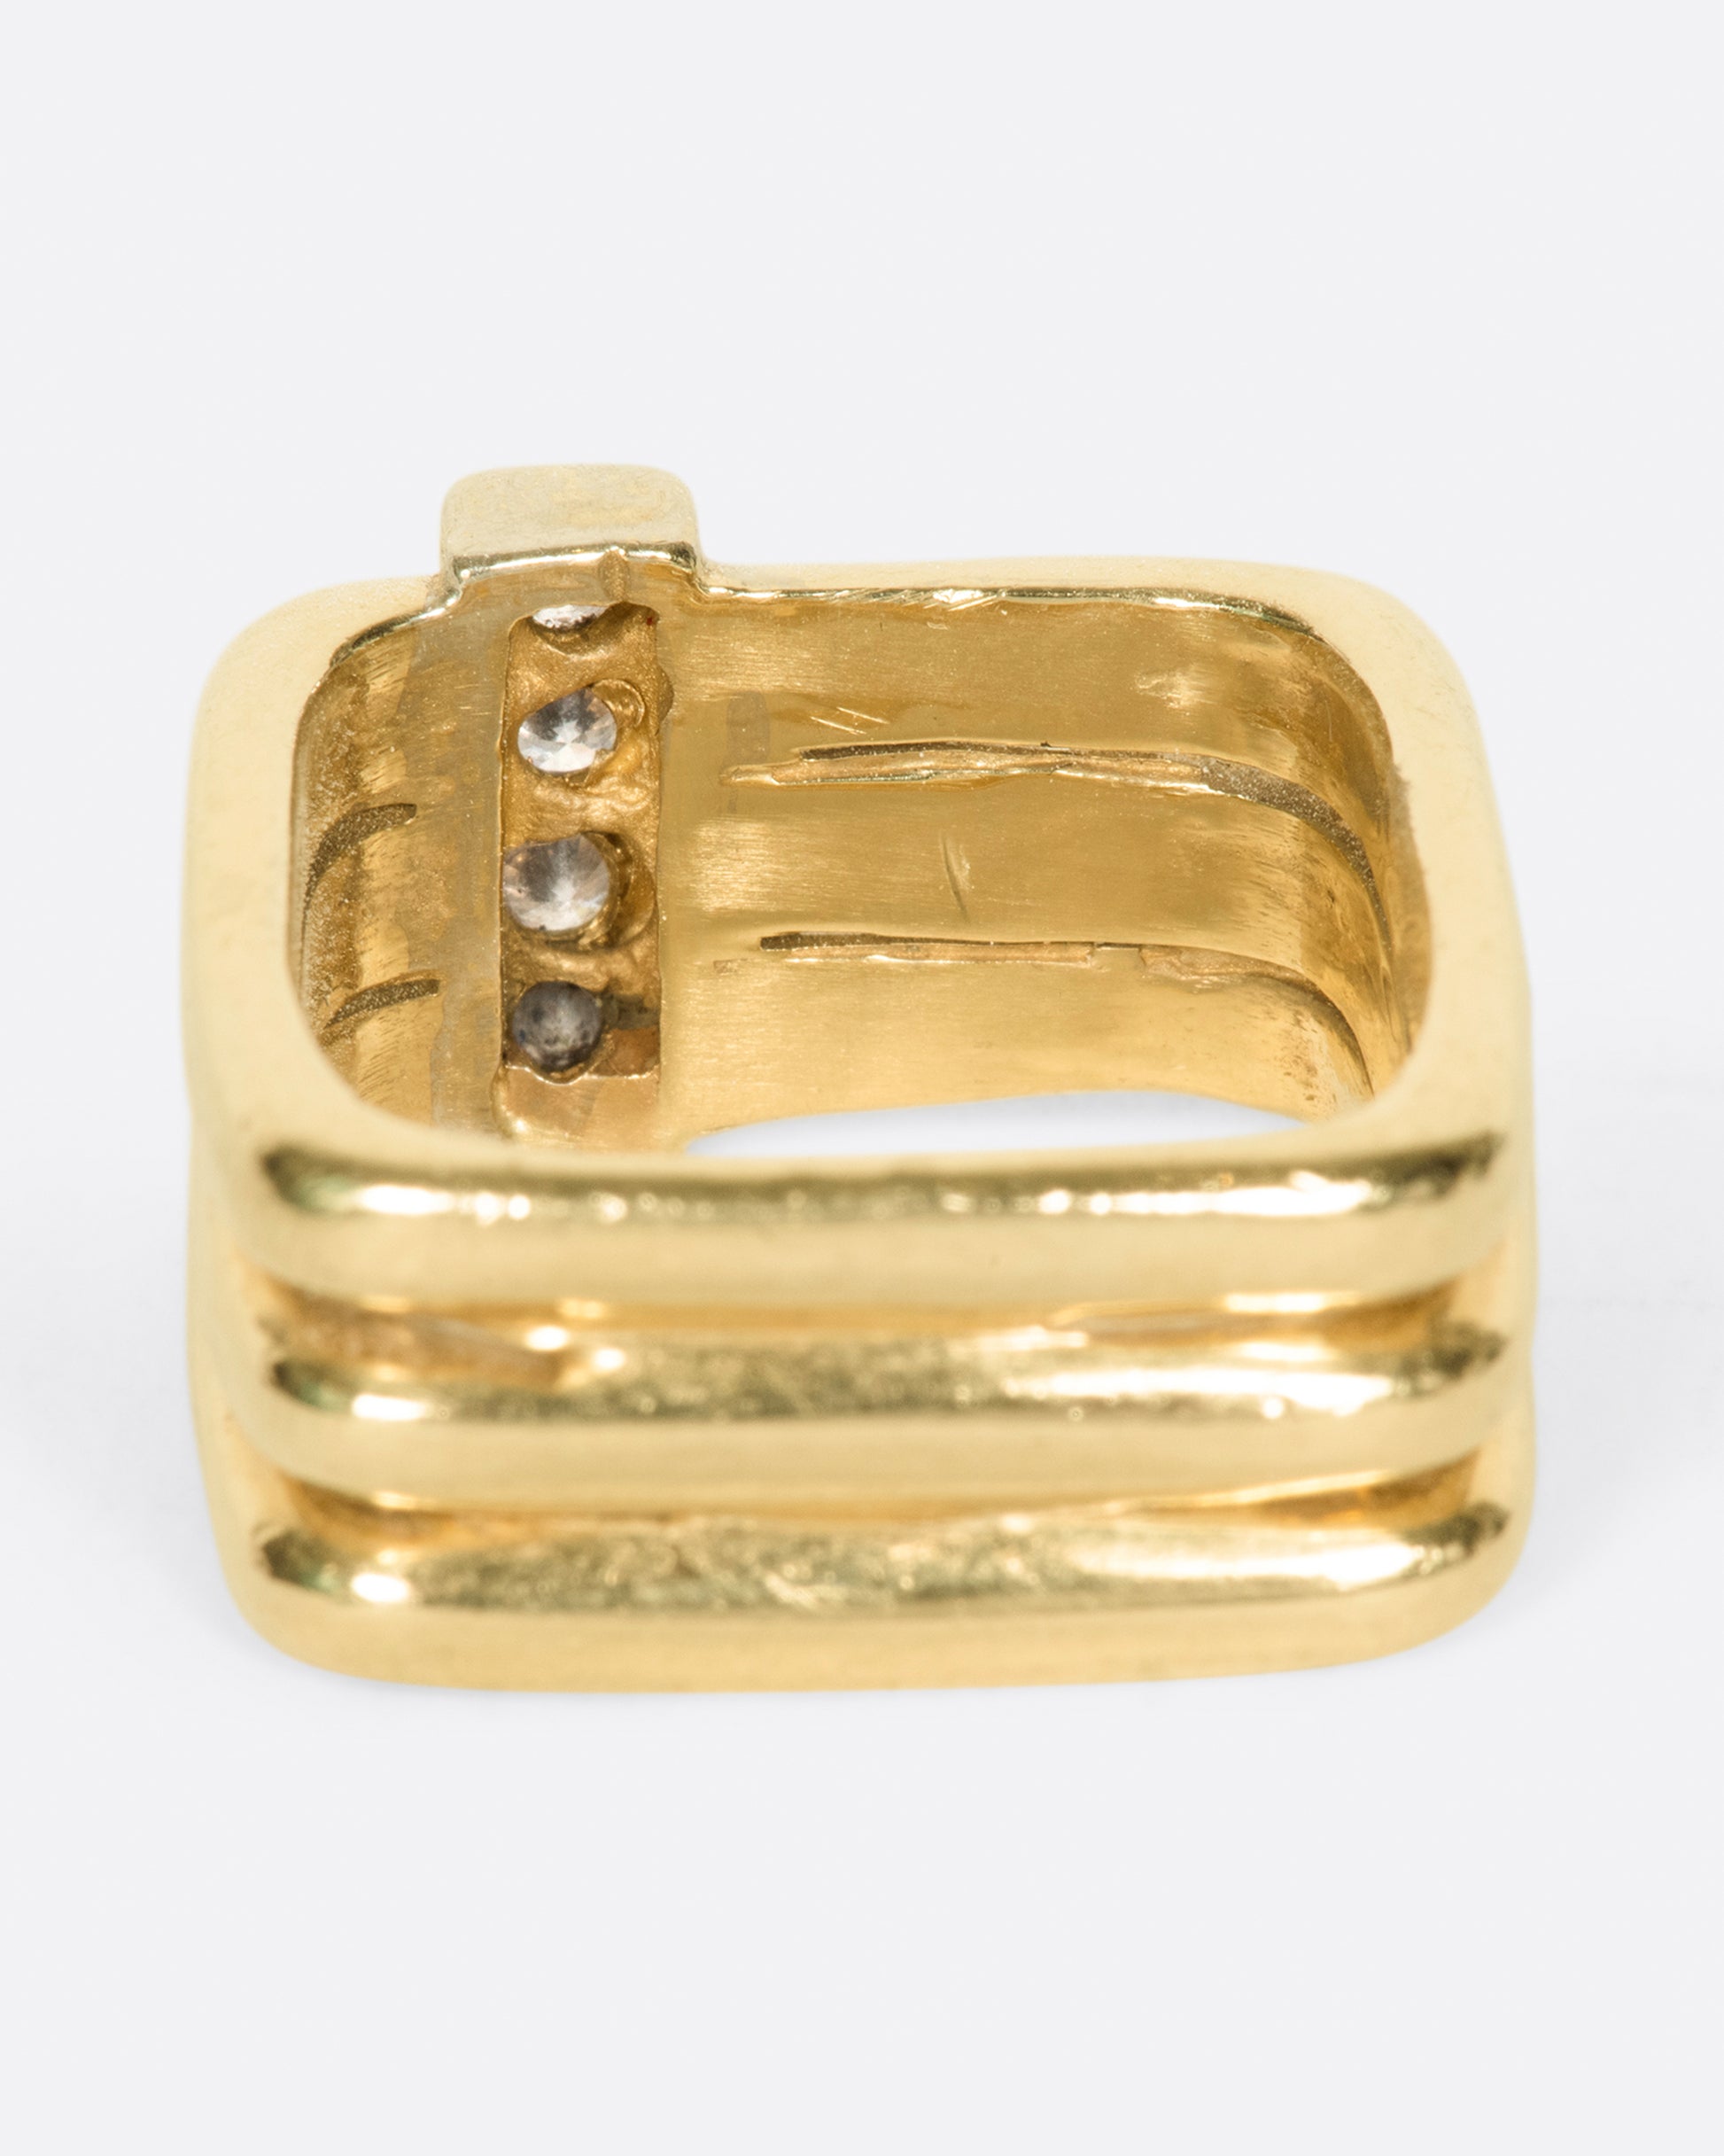 A single band that gives the illusion of a stack, connected with diamonds, shown from the back.